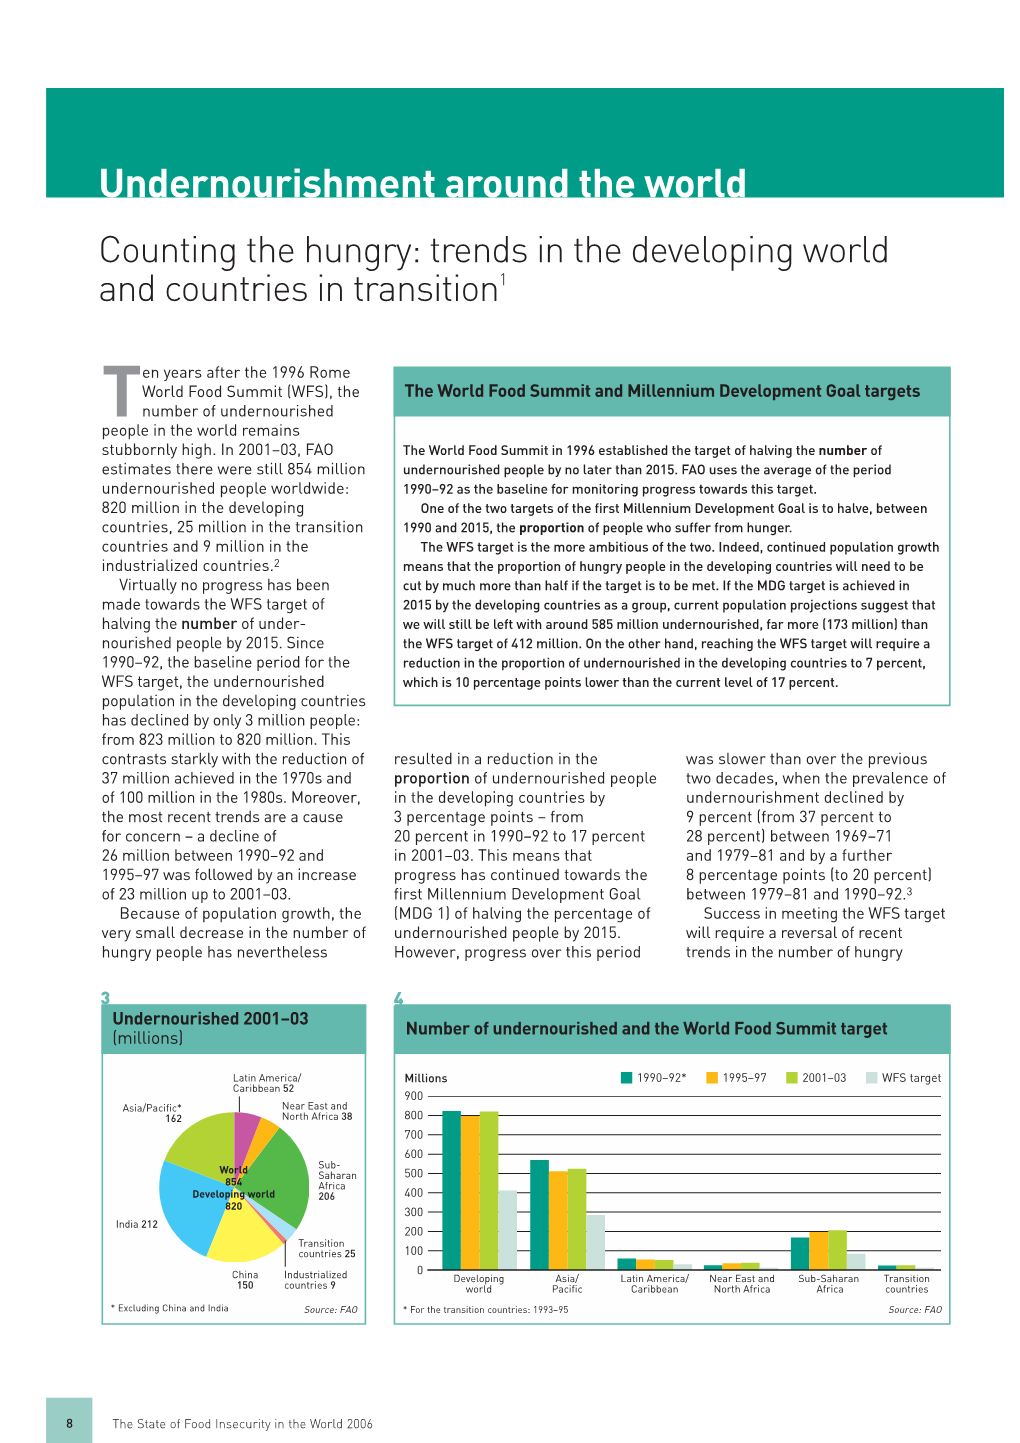 Undernourishment Around the World Counting the Hungry: Trends in the Developing World and Countries in Transition1